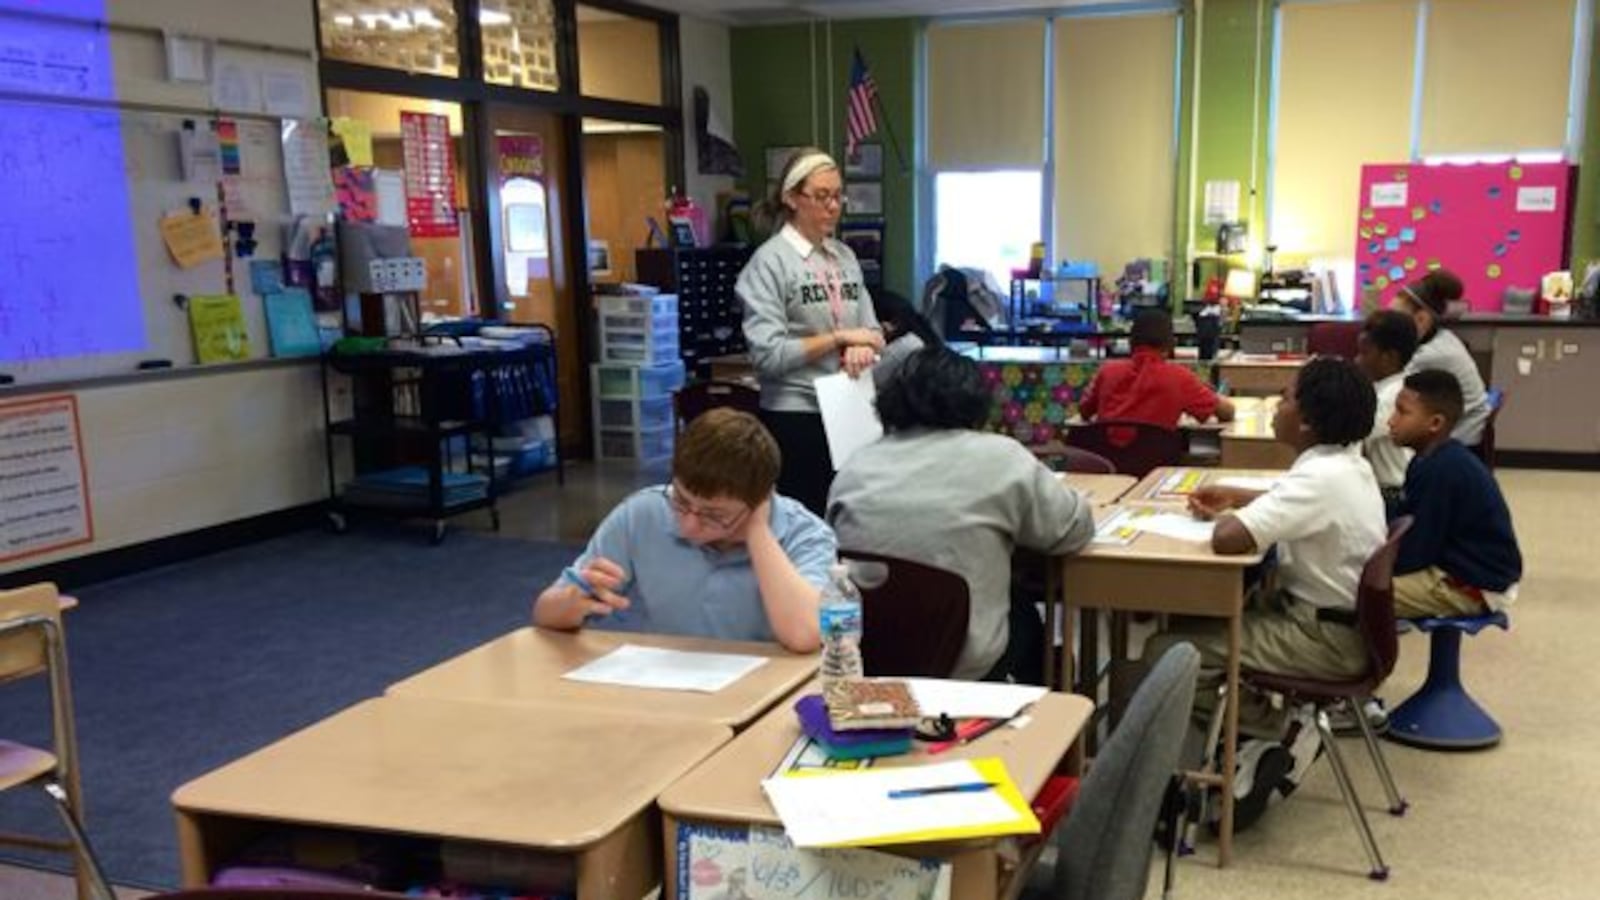 Megan Smith teaches math at Arlington Woods School 99, which is a Project Restore school.